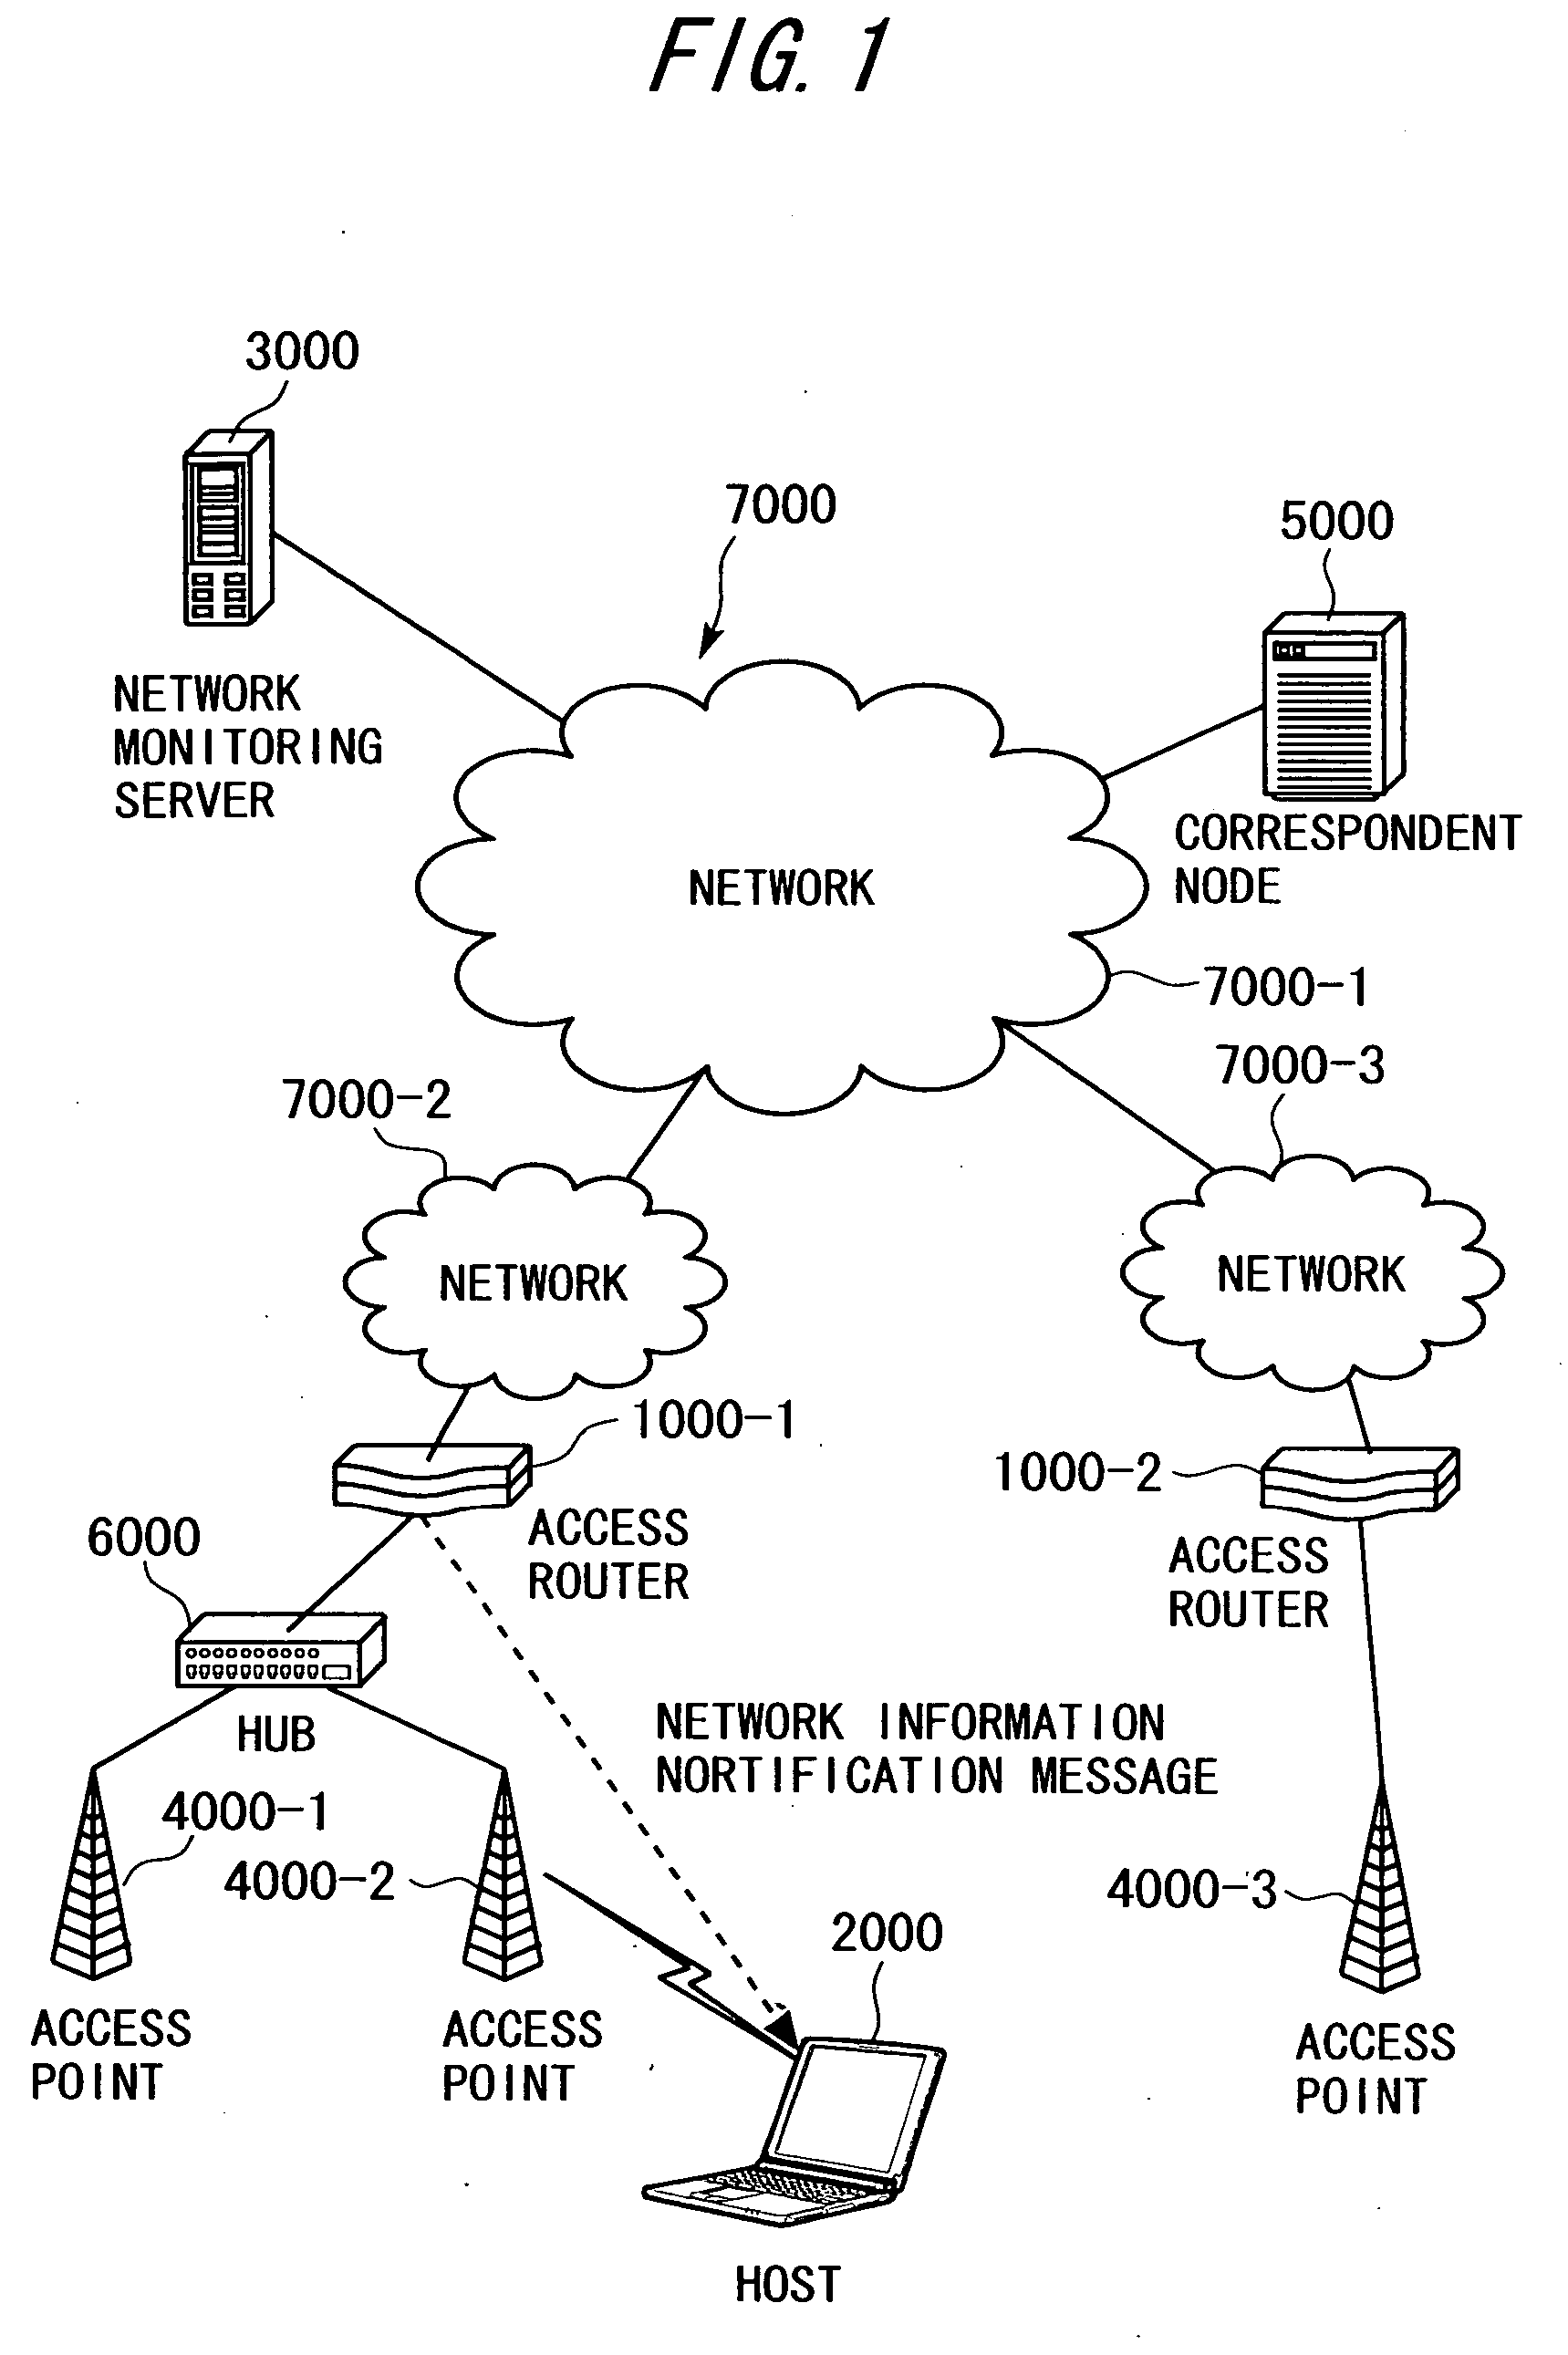 Access router and terminal device